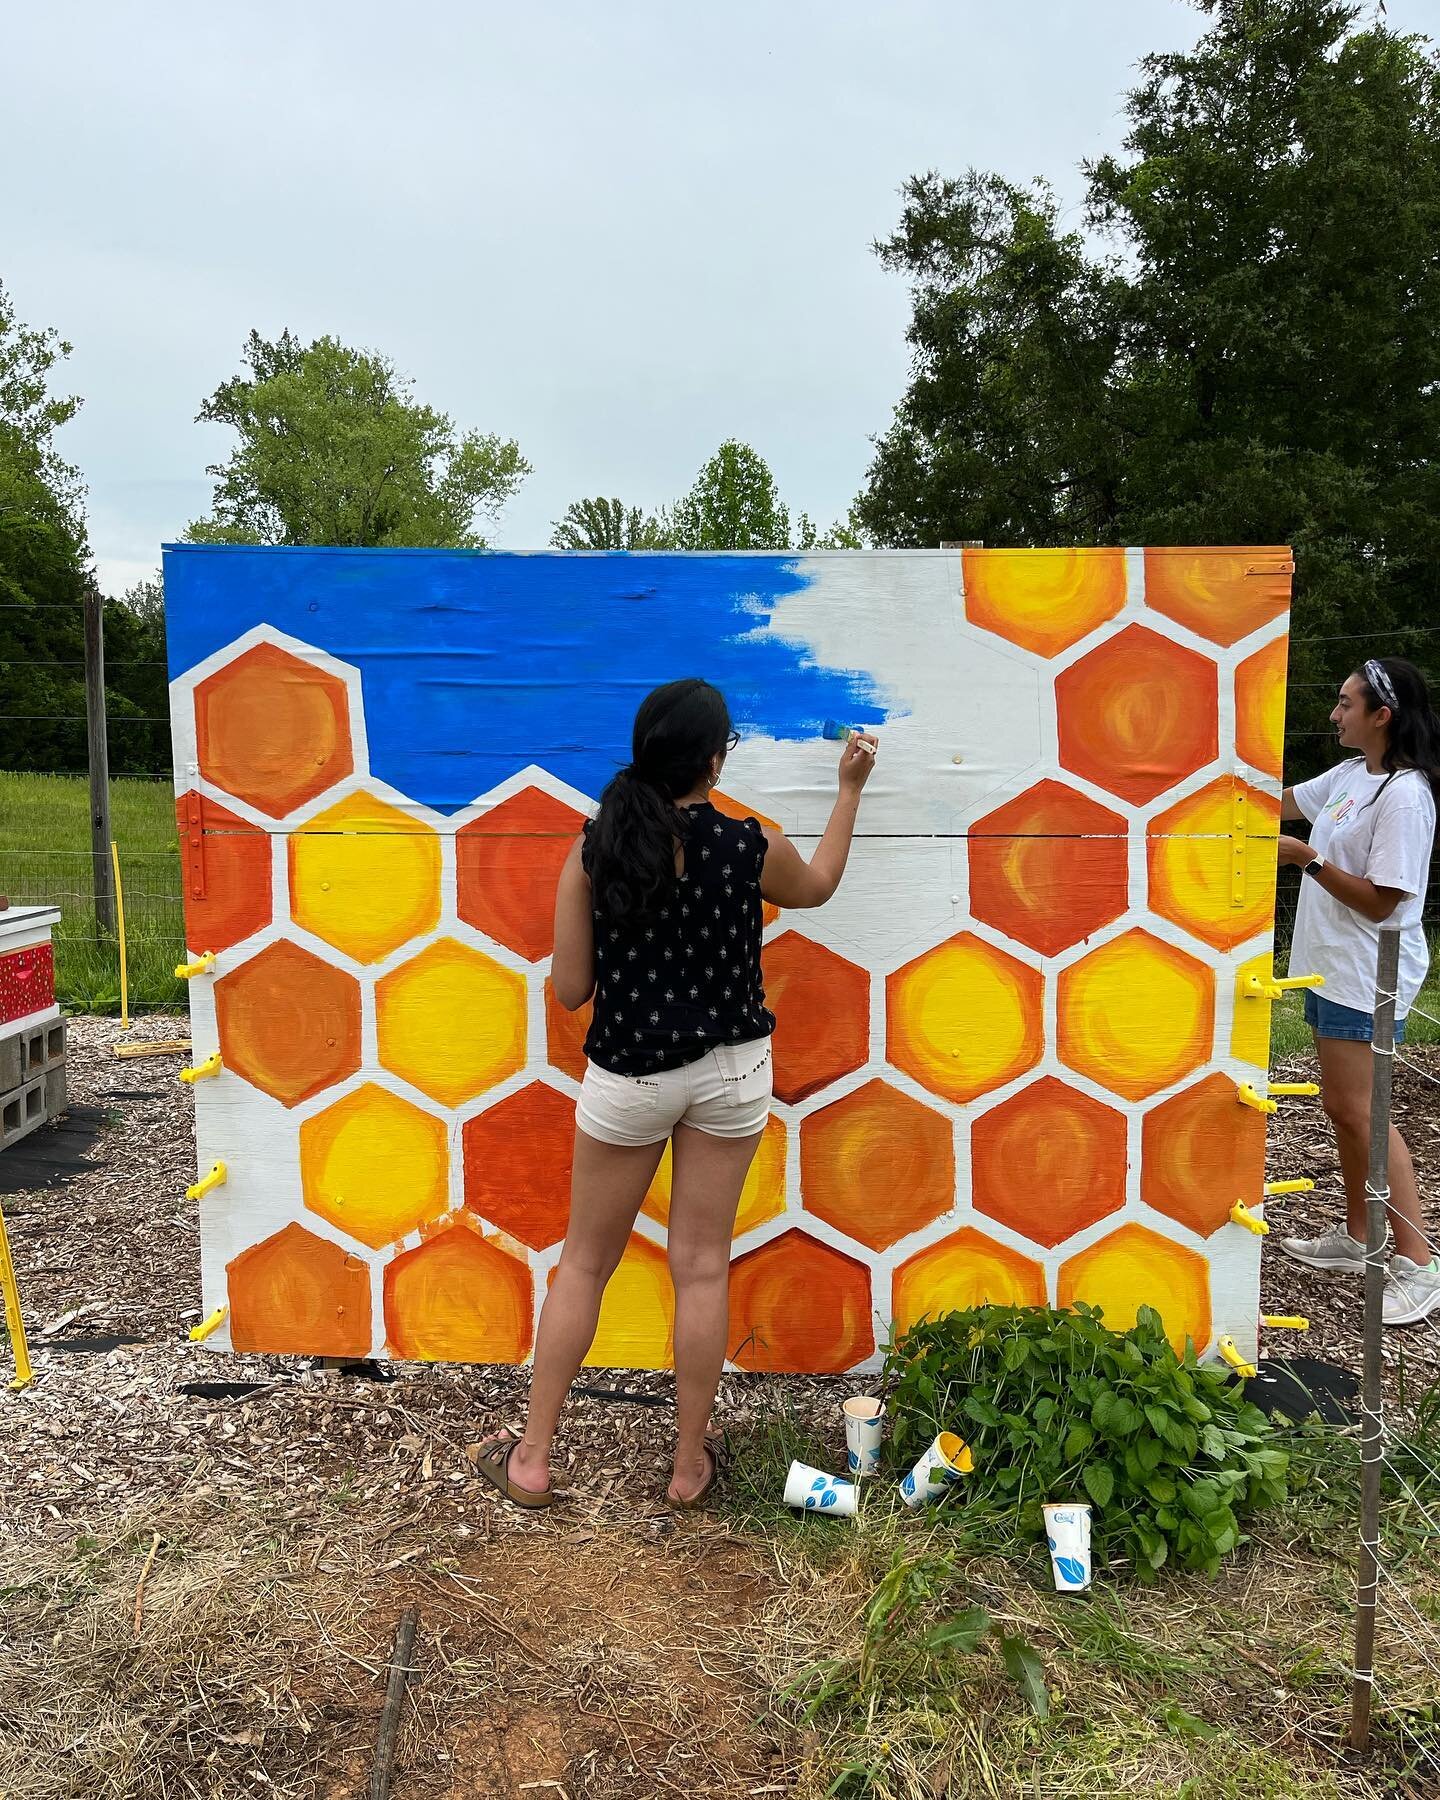 We are almost done with our mural! Last chance to leave your mark on MKG by helping us paint our bee area walls this Tuesday 3-5pm! Register at the volunteering link in our bio!